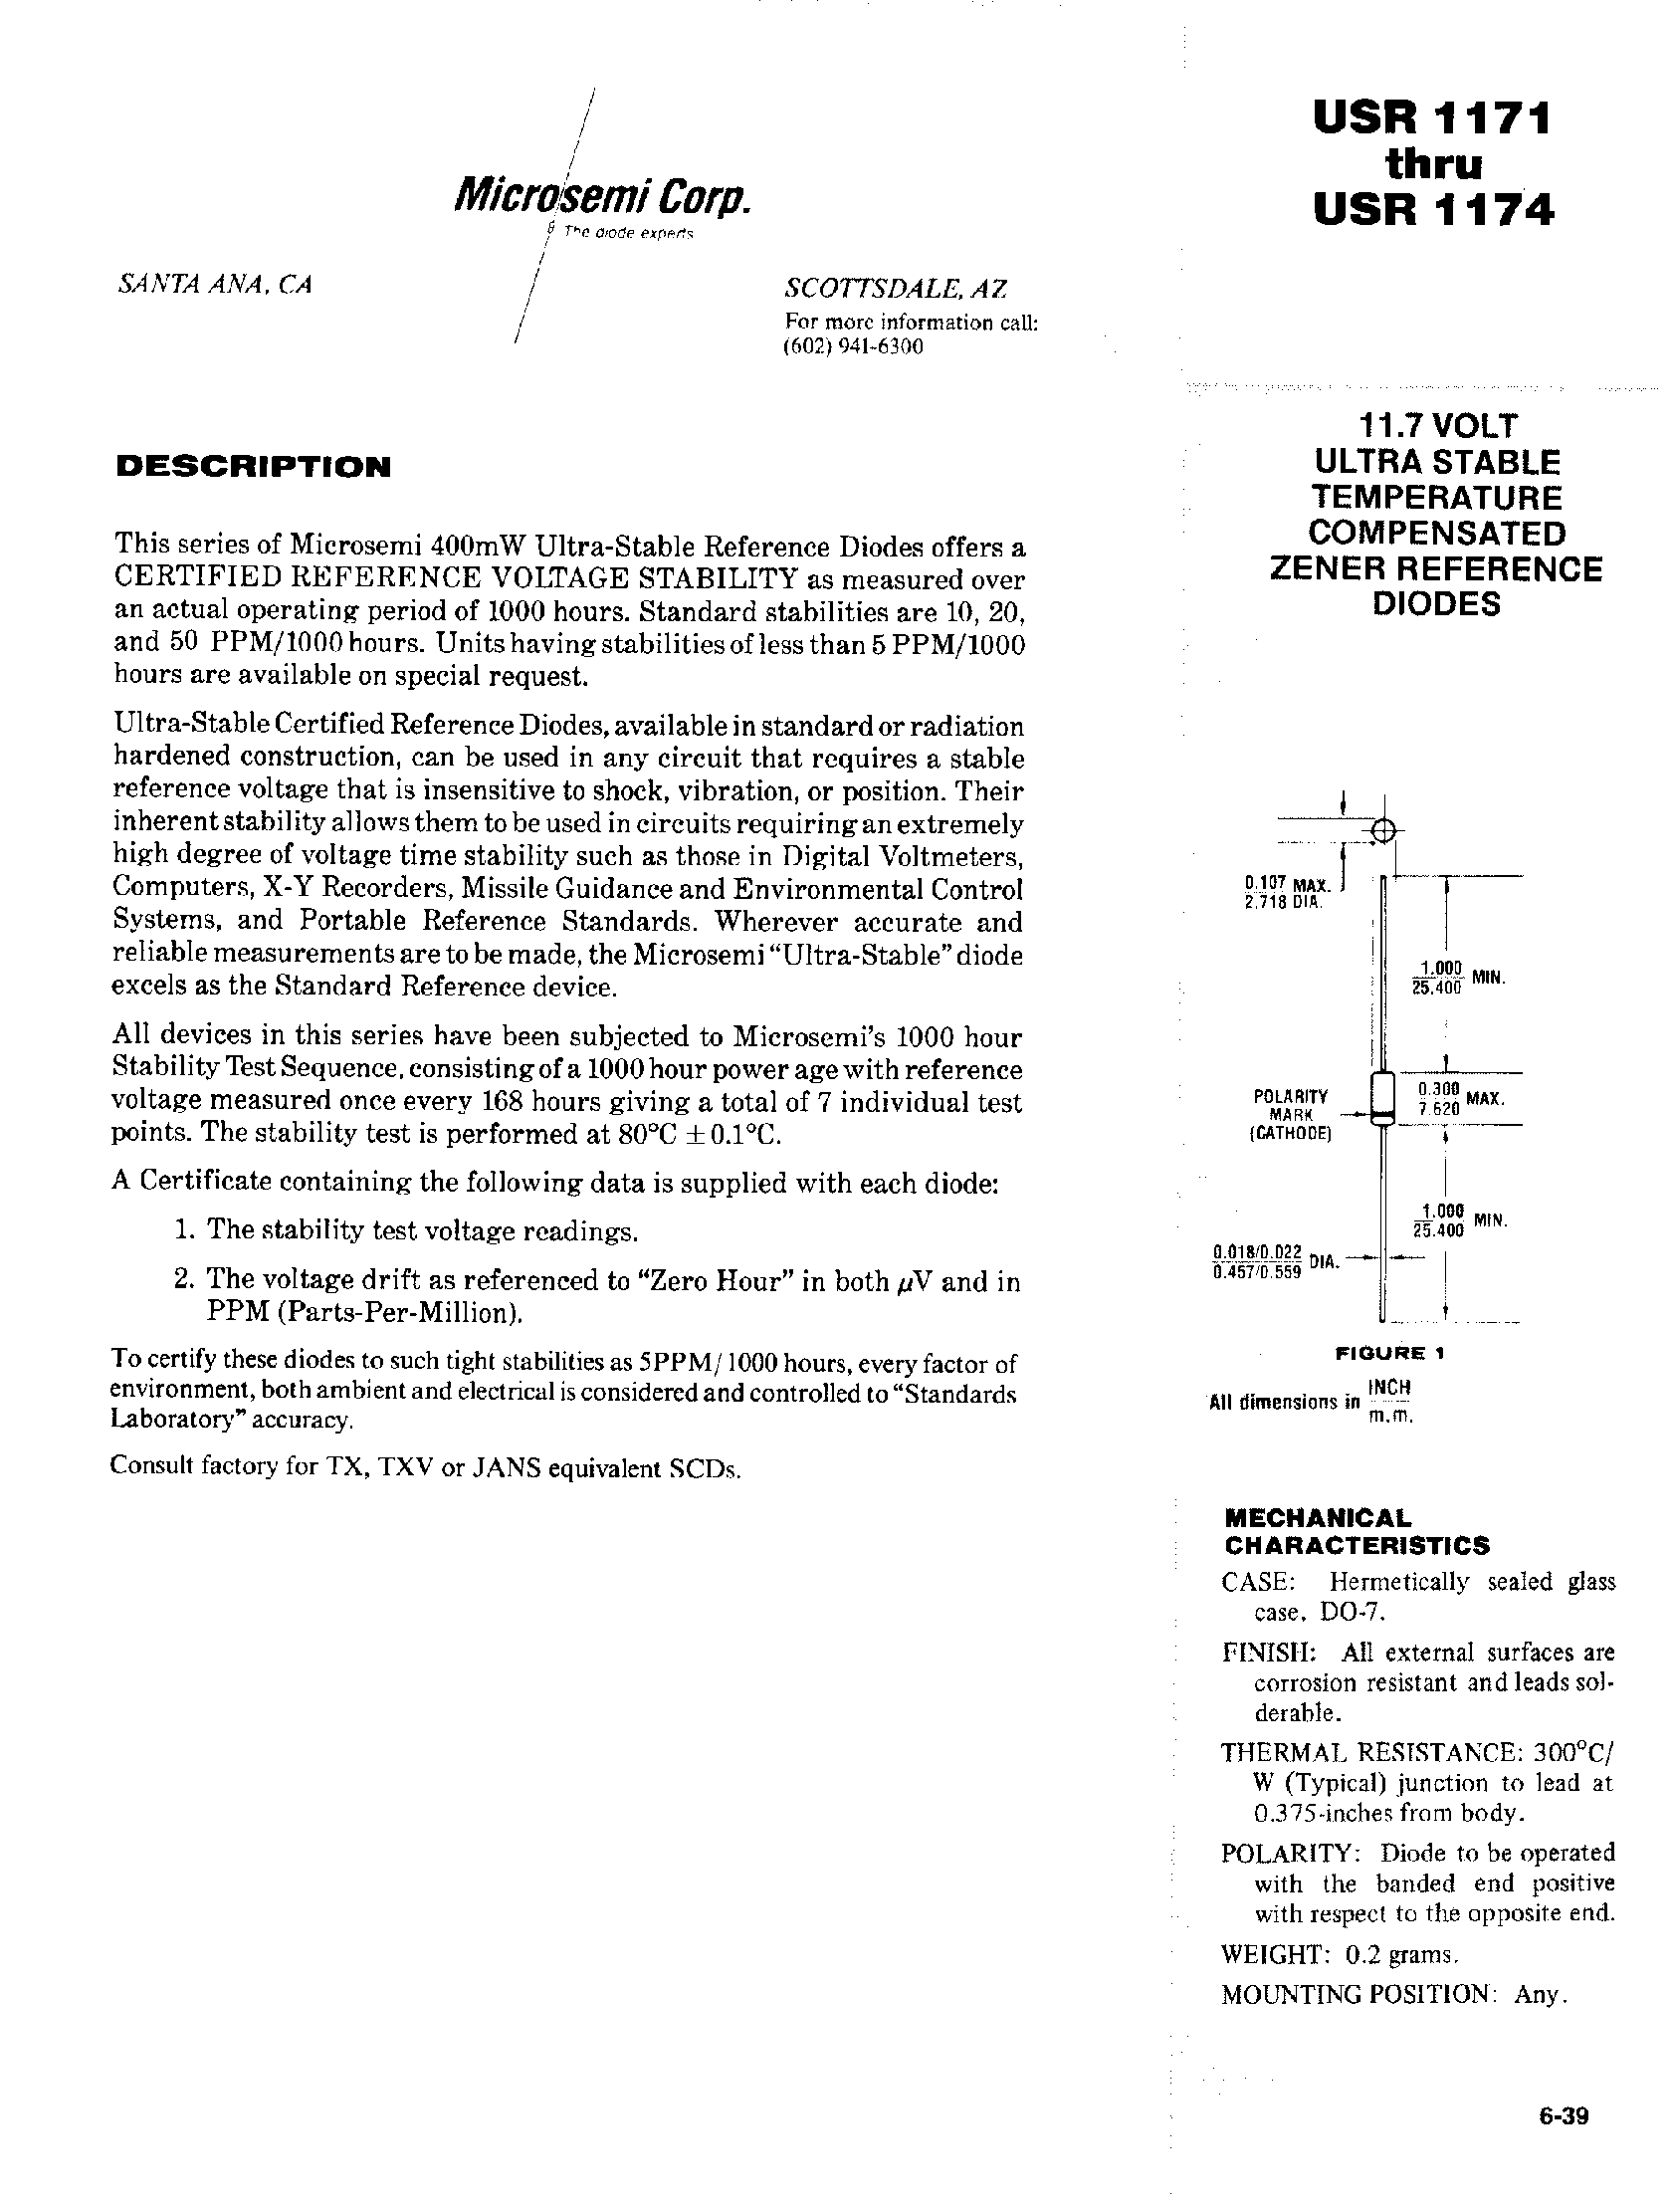 Datasheet USR1171 - 11.7 VOLT ULTRA STABLE TEMPERATURE COMPENSATED ZENER REFERENCE DIODES page 1